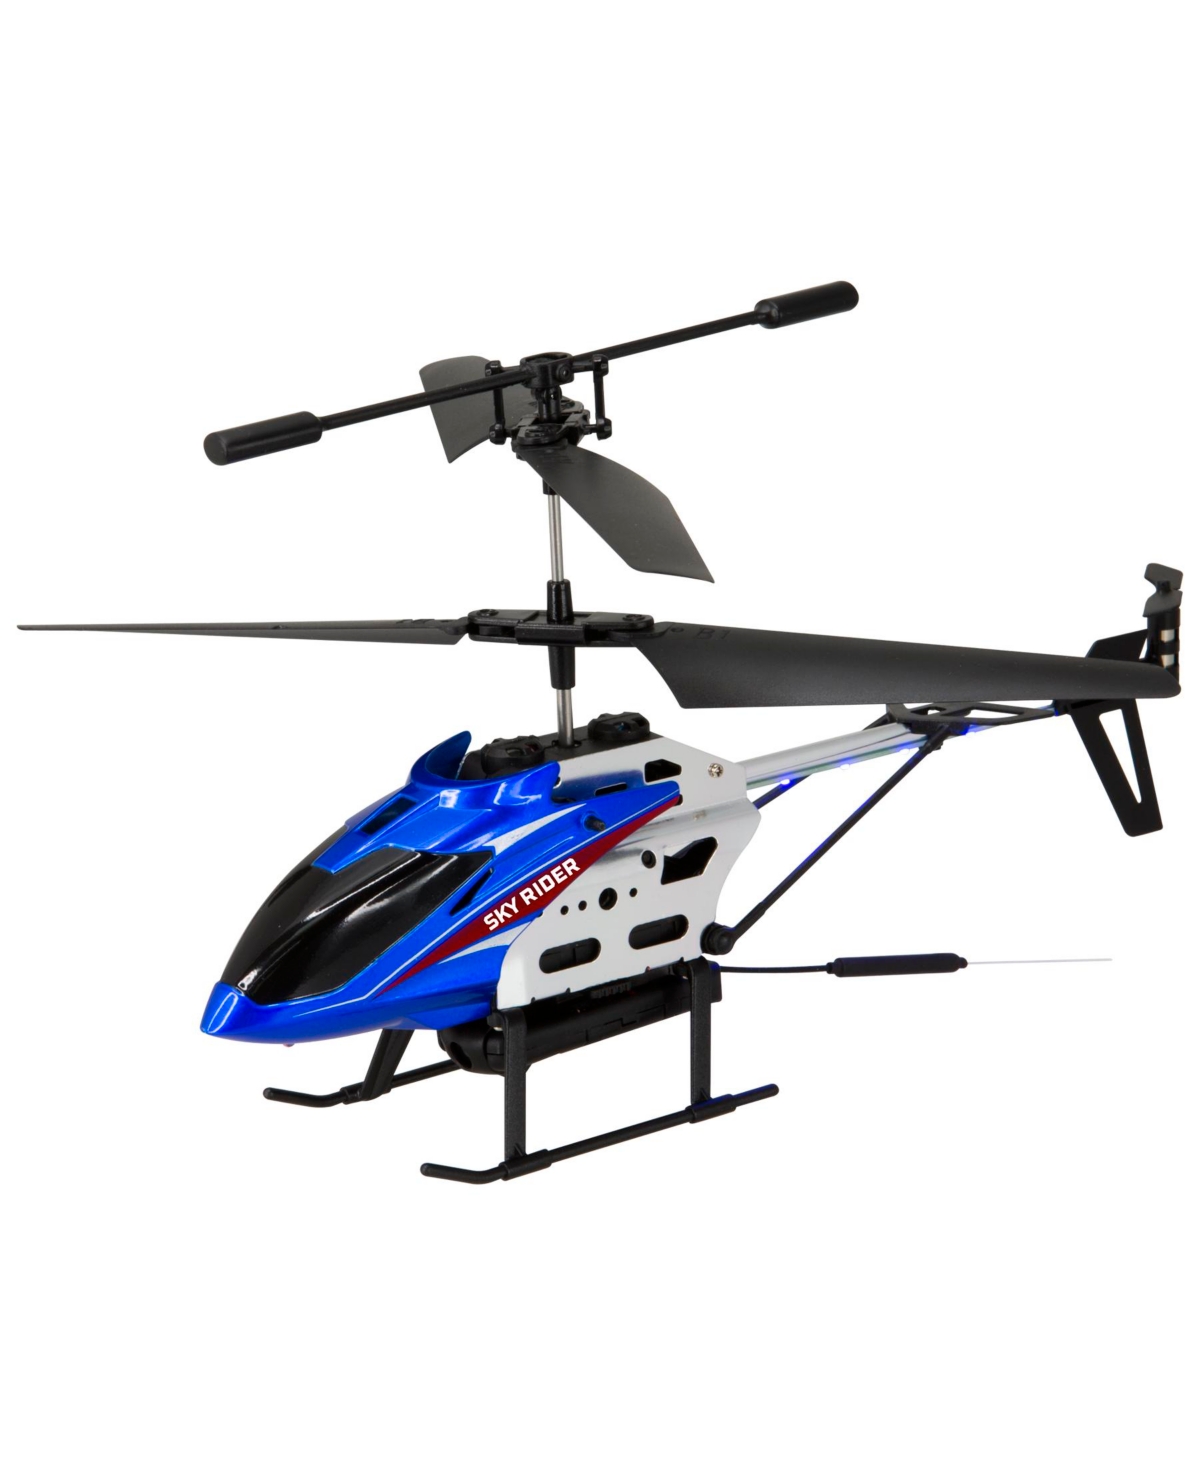 Ilive Sky Rider H-41 Pilot Helicopter Drone With Wi-fi Camera, 8.27" X 7.09" In Blue